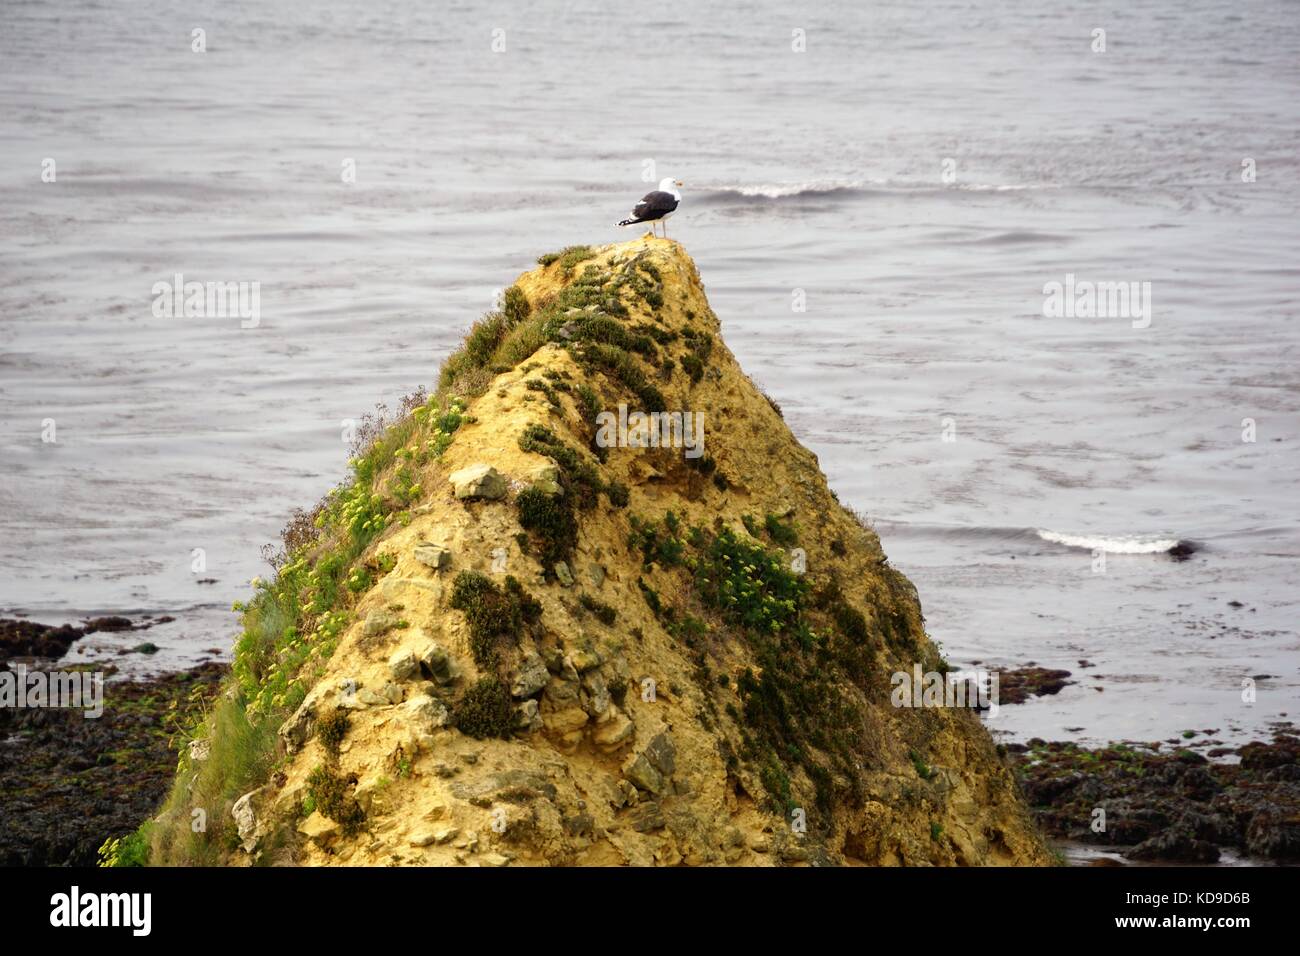 Normandy coastline/cliffs - with a bird / seagull on a large rock Stock Photo